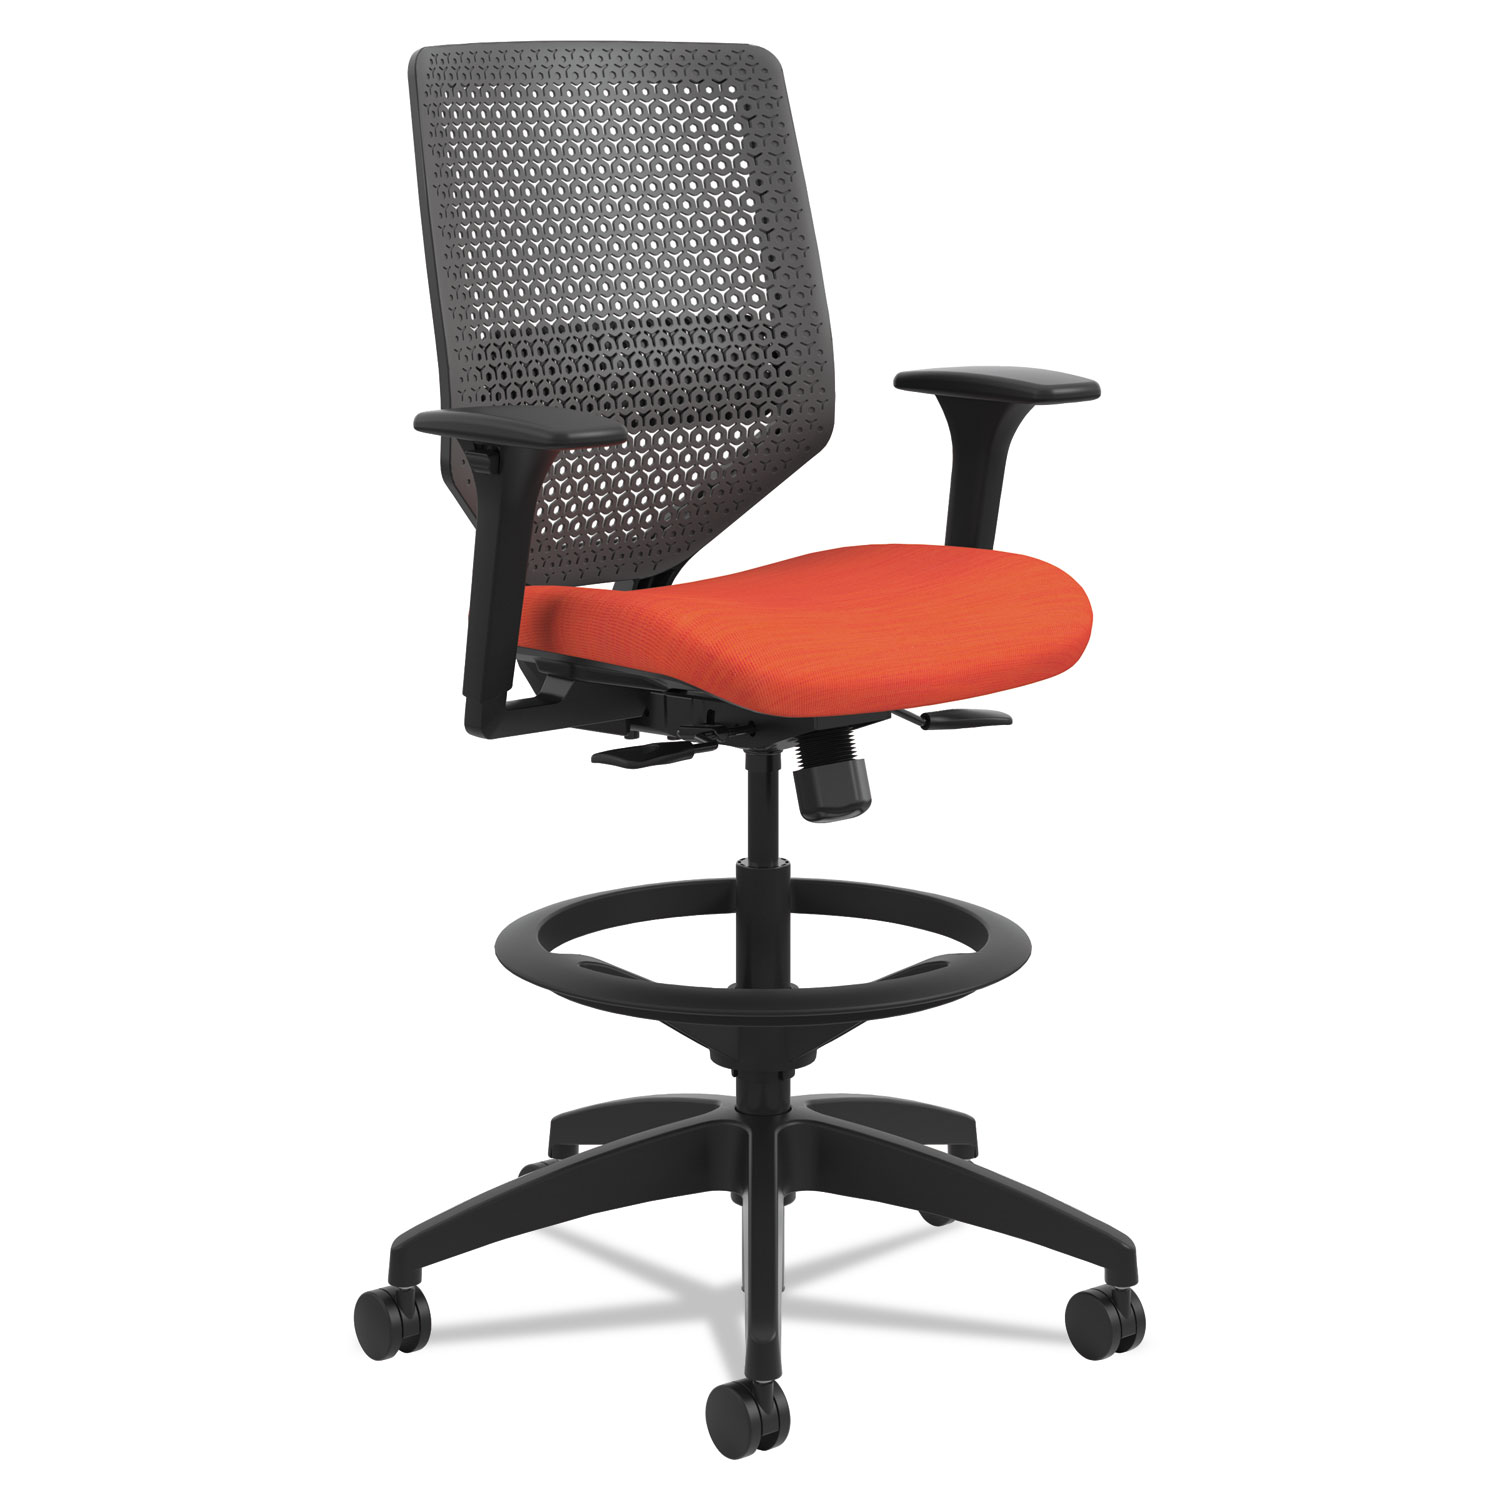  HON HONSVSR1ACLC46T Solve Series ReActiv Back Task Stool, 33 Seat Height, Supports up to 300 lbs., Bittersweet Seat/Charcoal Back, Black Base (HONSVSR1ACLC46T) 